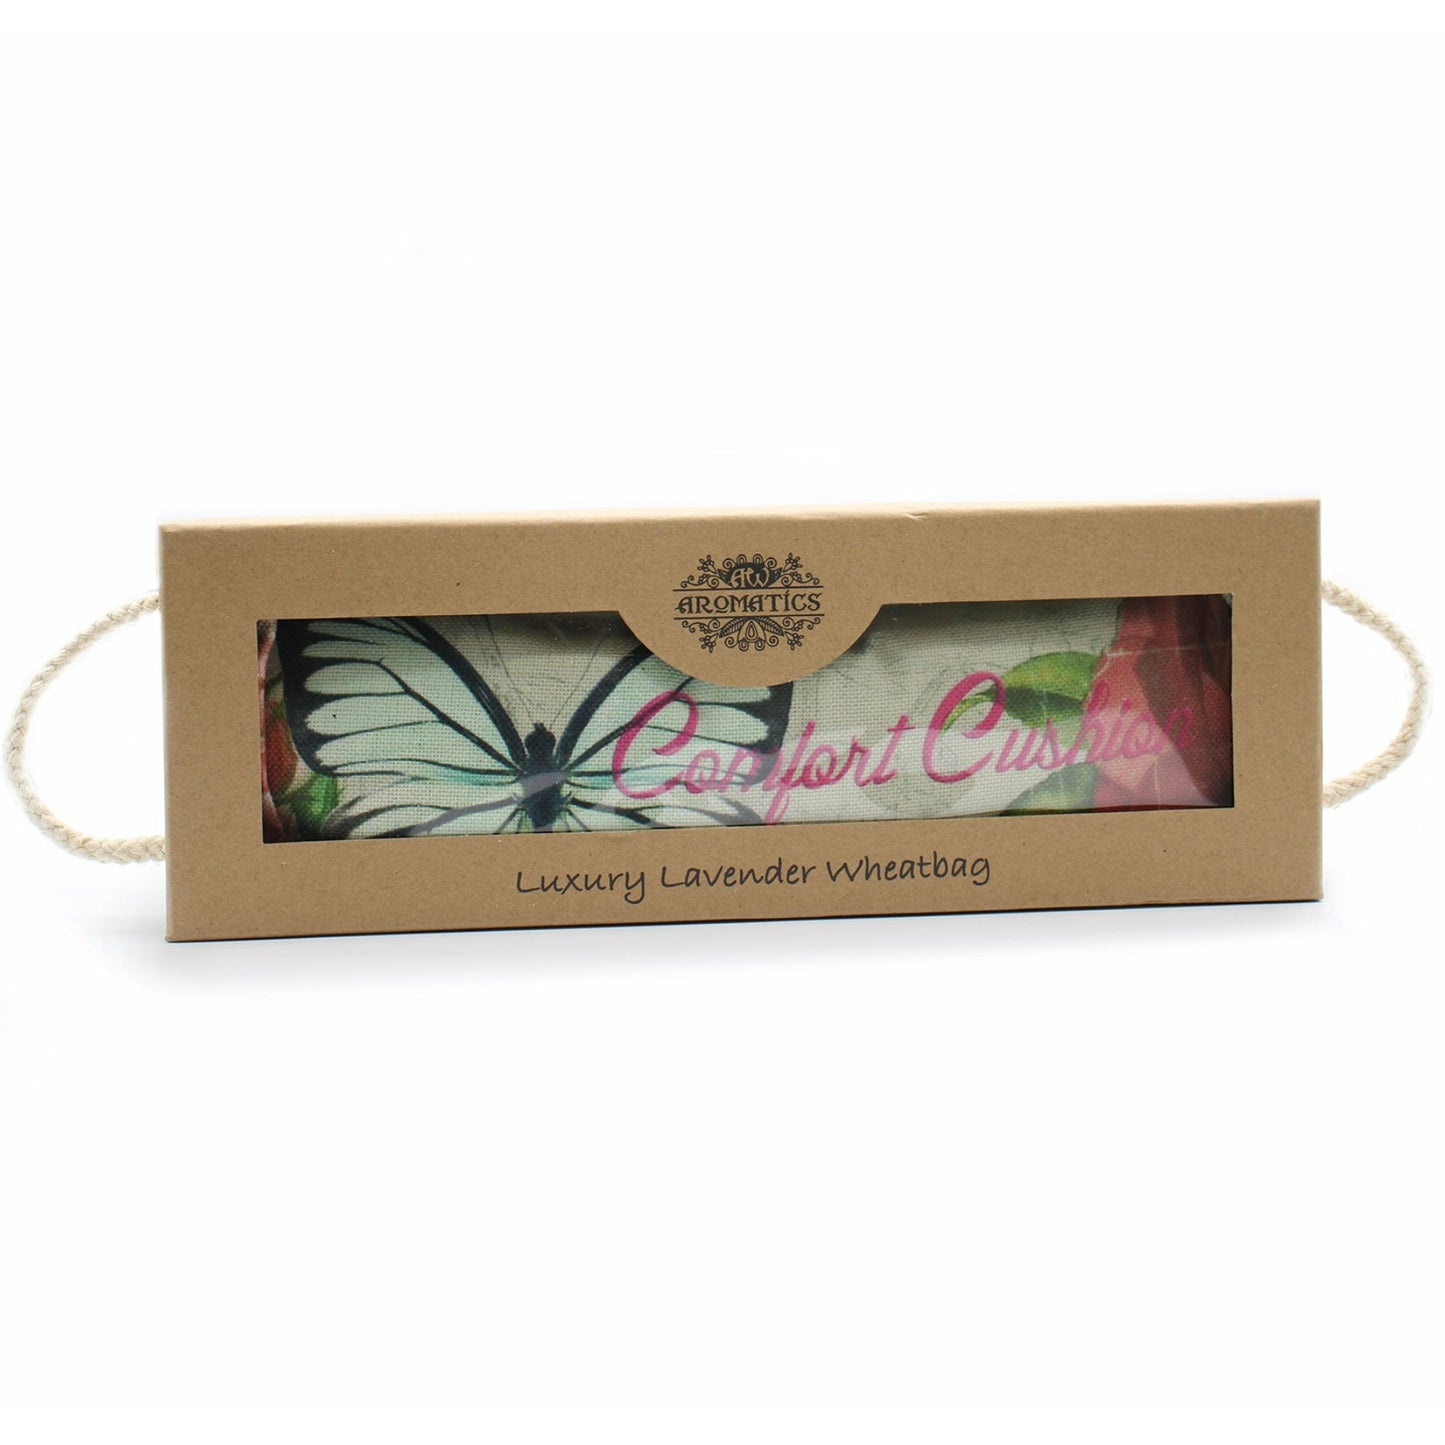 Lavender Wheat Bag In Gift Box, butterfly & Roses